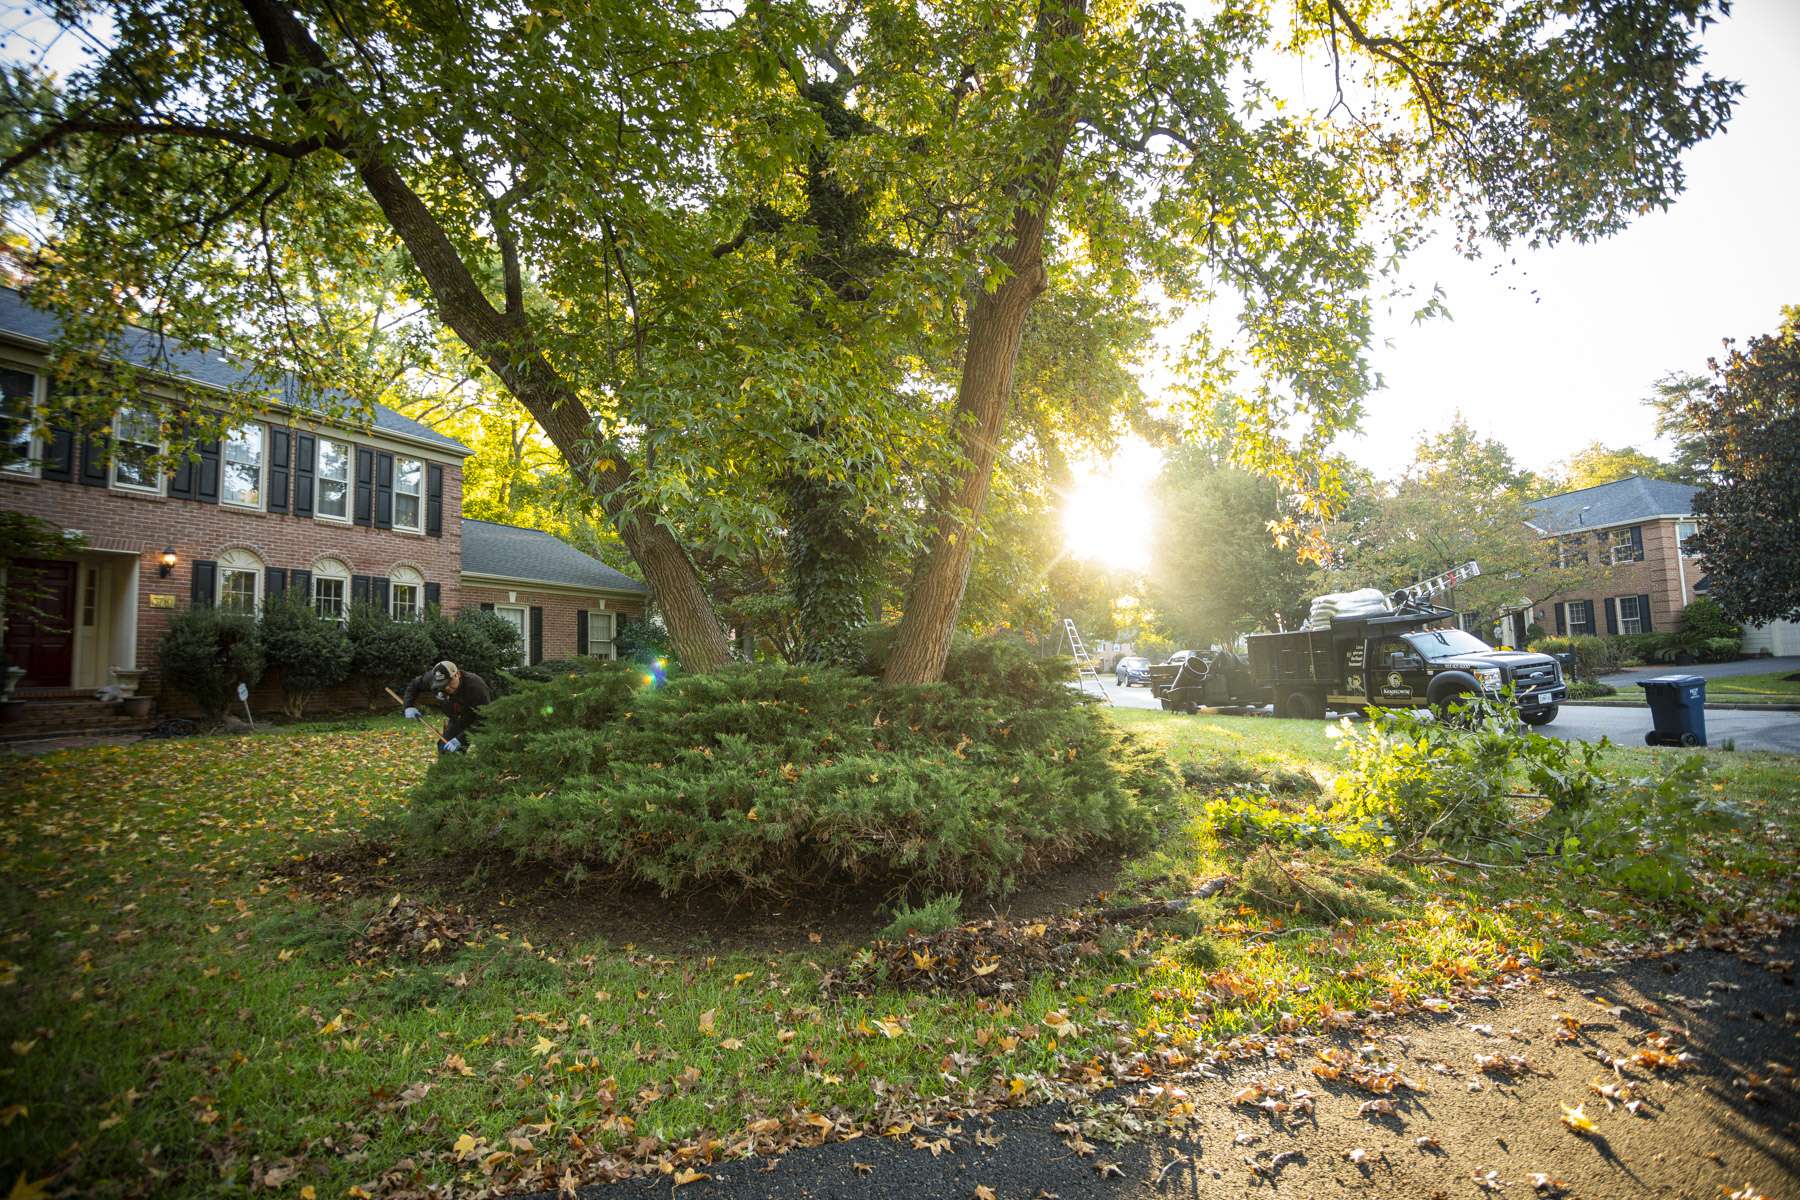 a landscaped front yard with a large shade tree, groundcover planting bed and fallen leaves